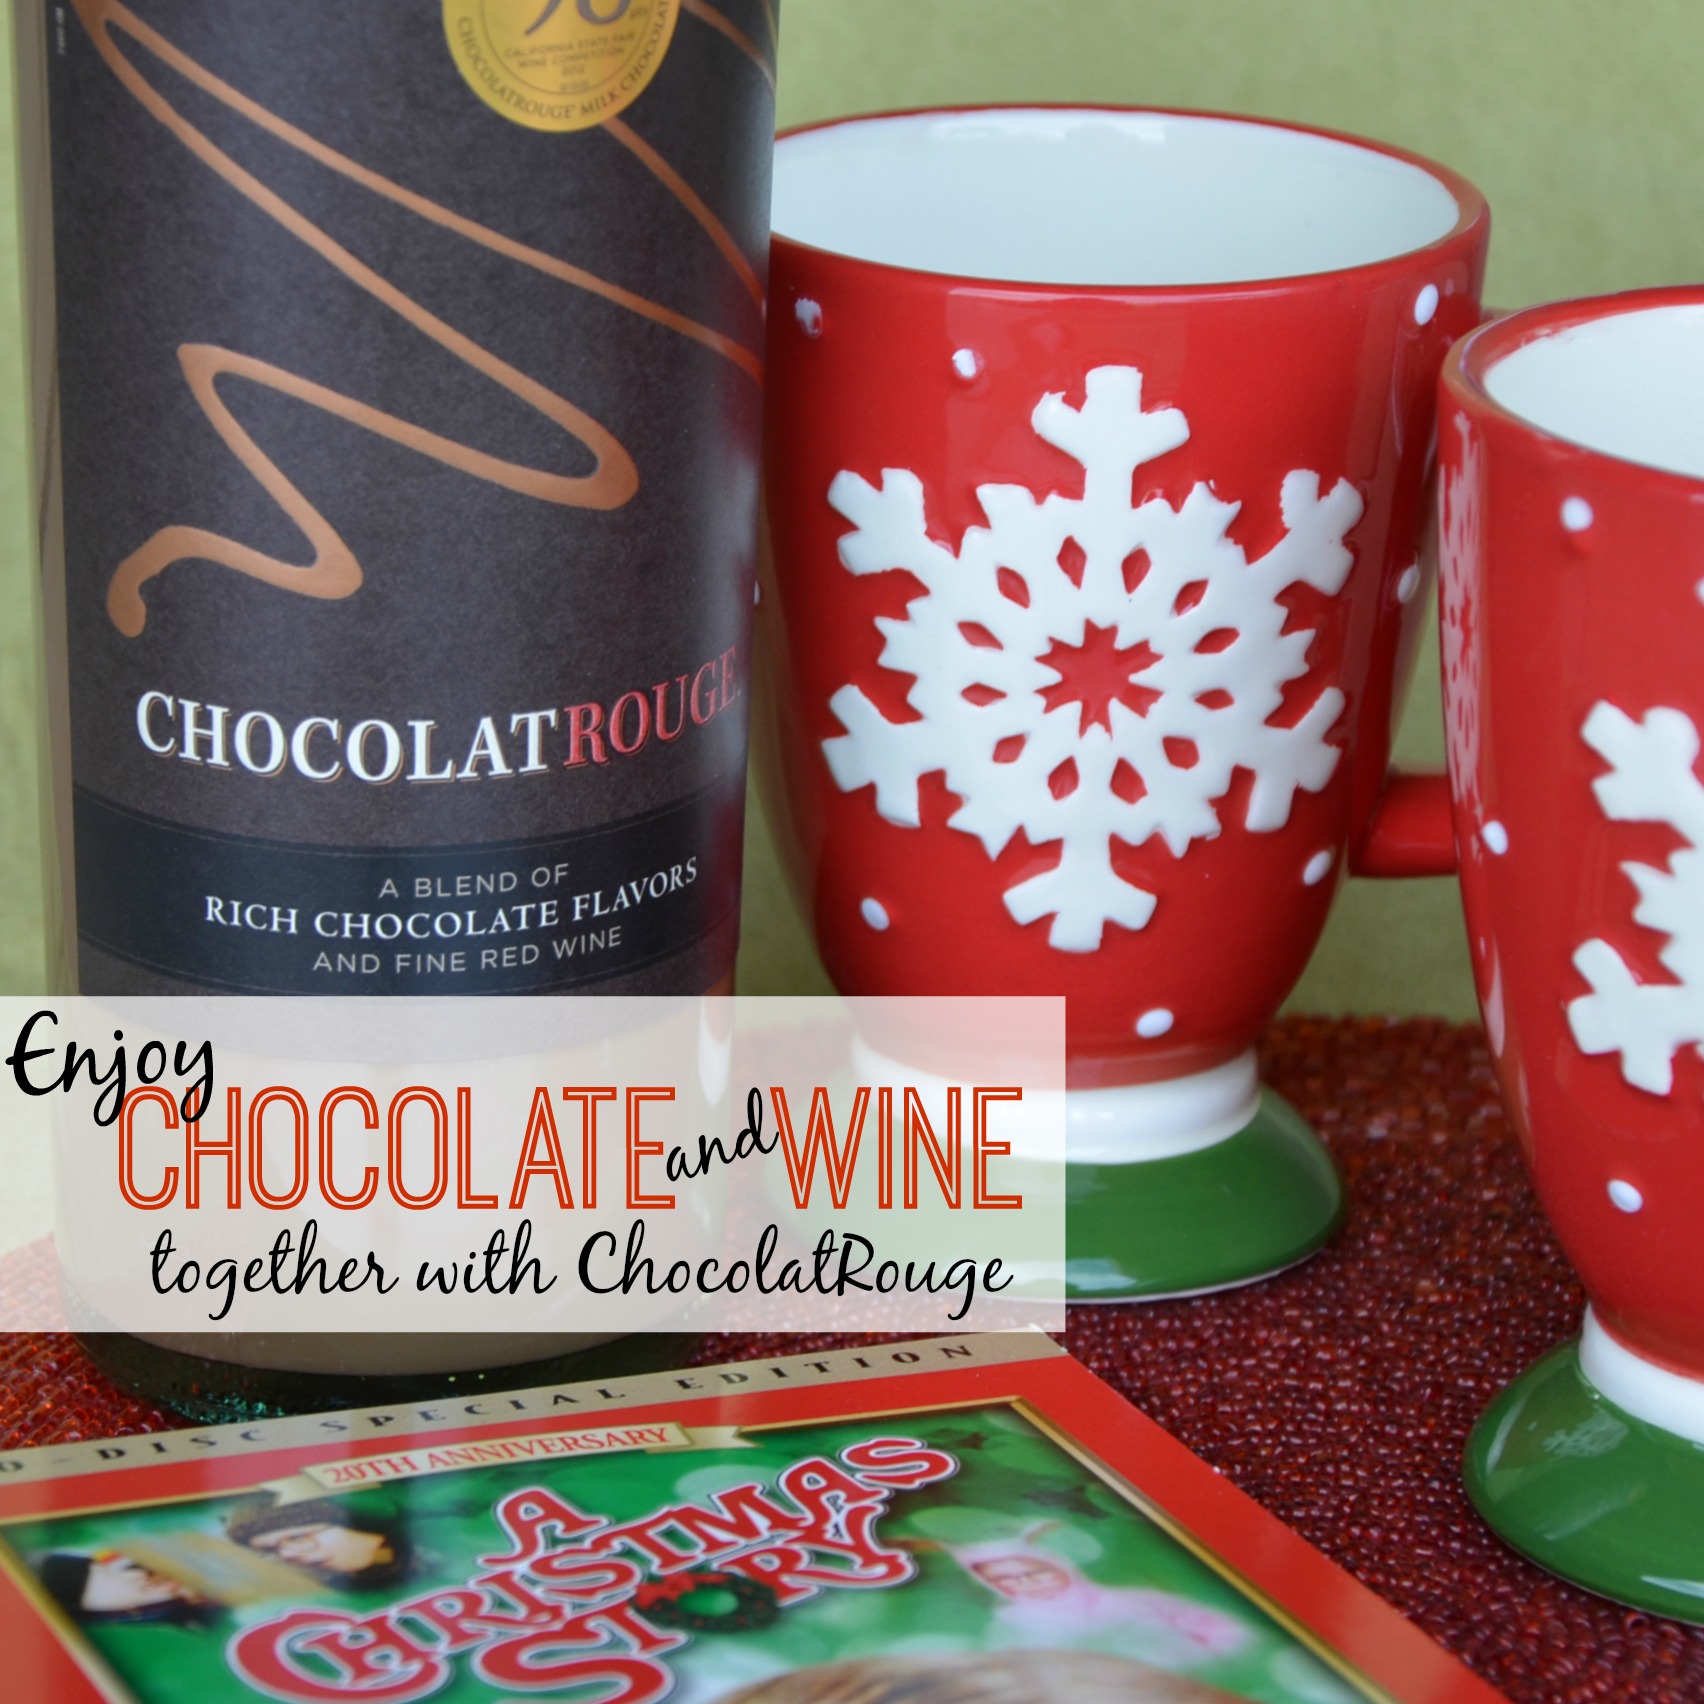 Enjoy Chocolate and Wine together with ChocolatRouge #Cheers2Chocolate #ChocolateRouge #shop #cbias